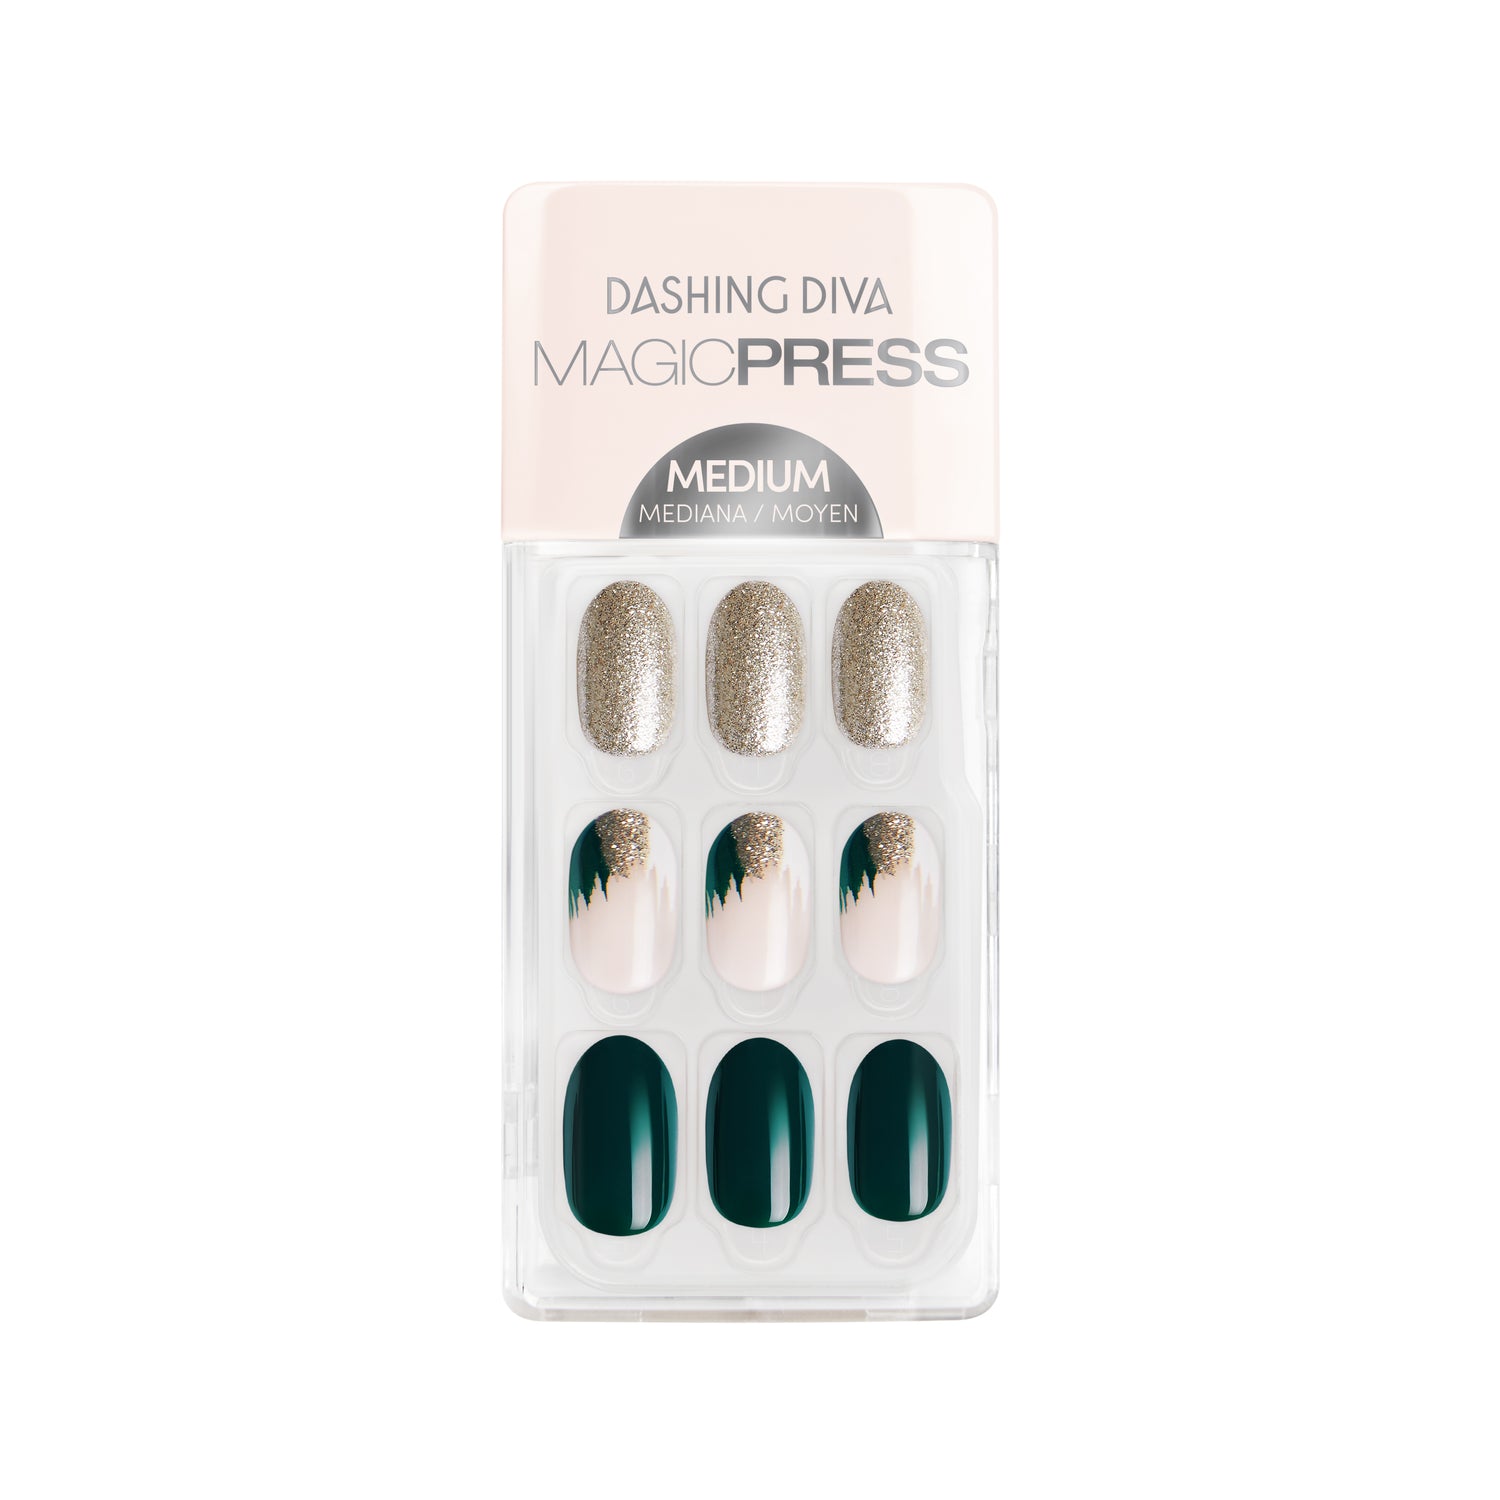 Medium length, oval shape, glossy finish. Deep green & semi-sheer nude press-on gel nails featuring gold glitter and airbrush french tip accents.